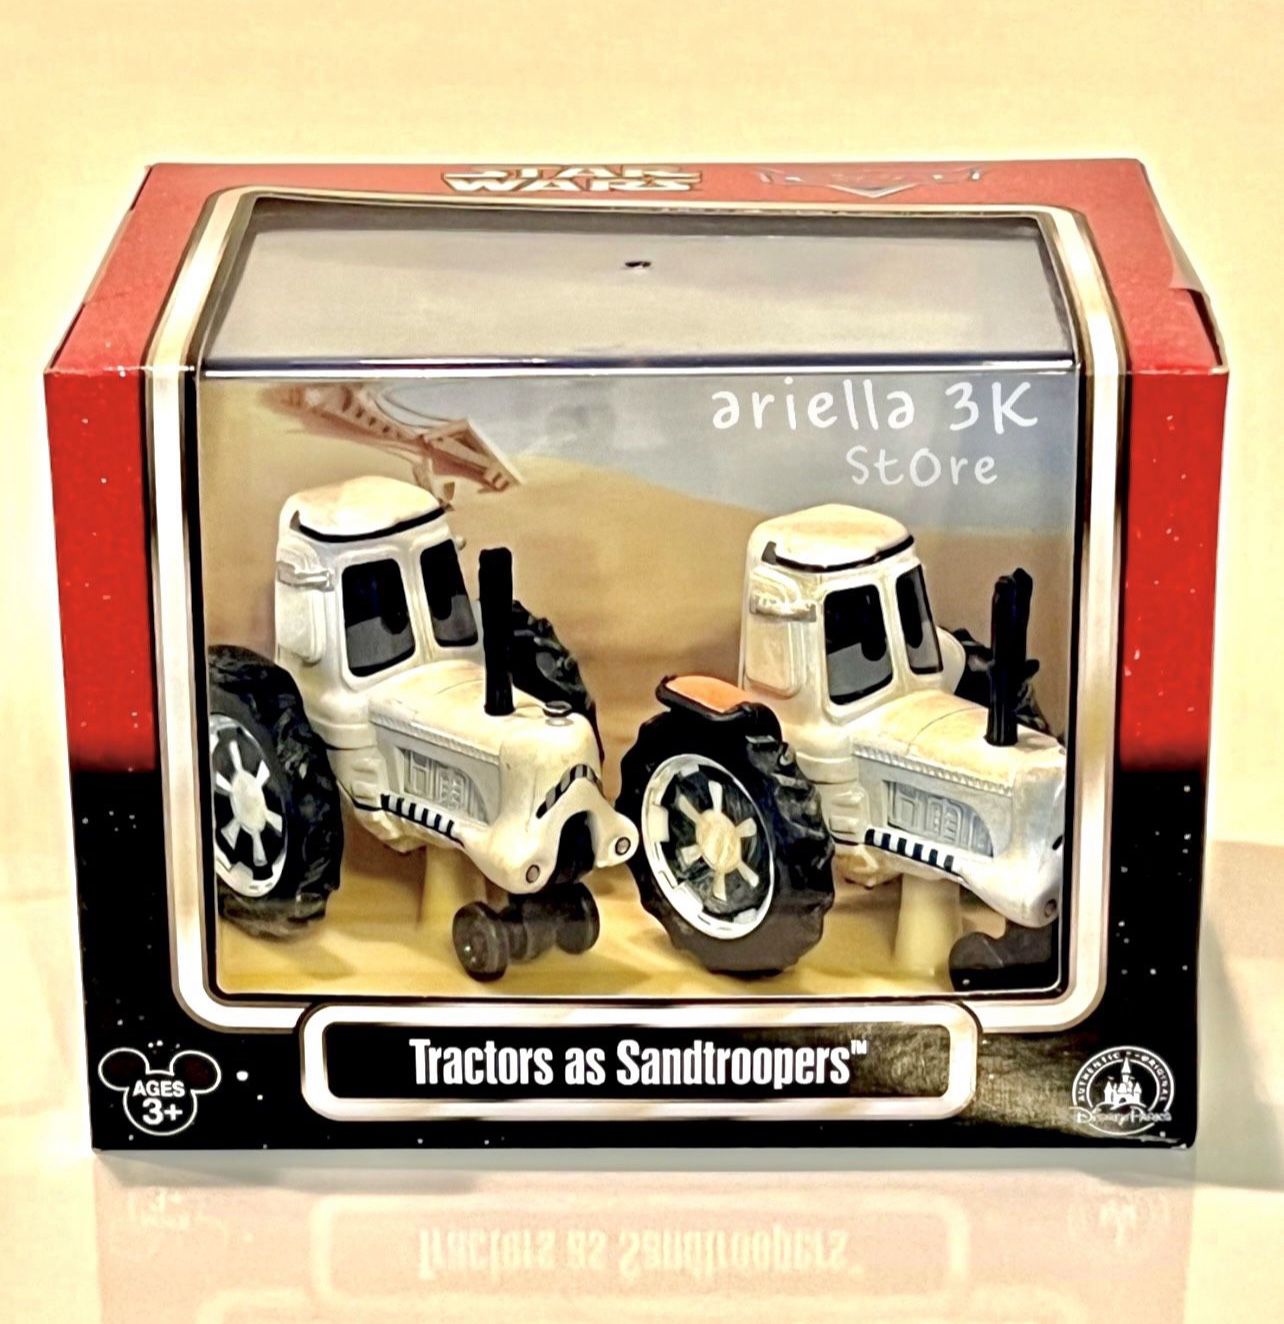 Disney Pixar Cars as Star Wars Tractors as Sandtroopers 2pk 2014 Exclusive to the Disney’s Hollywood Studios Star Wars Weekends  Limited Edition 